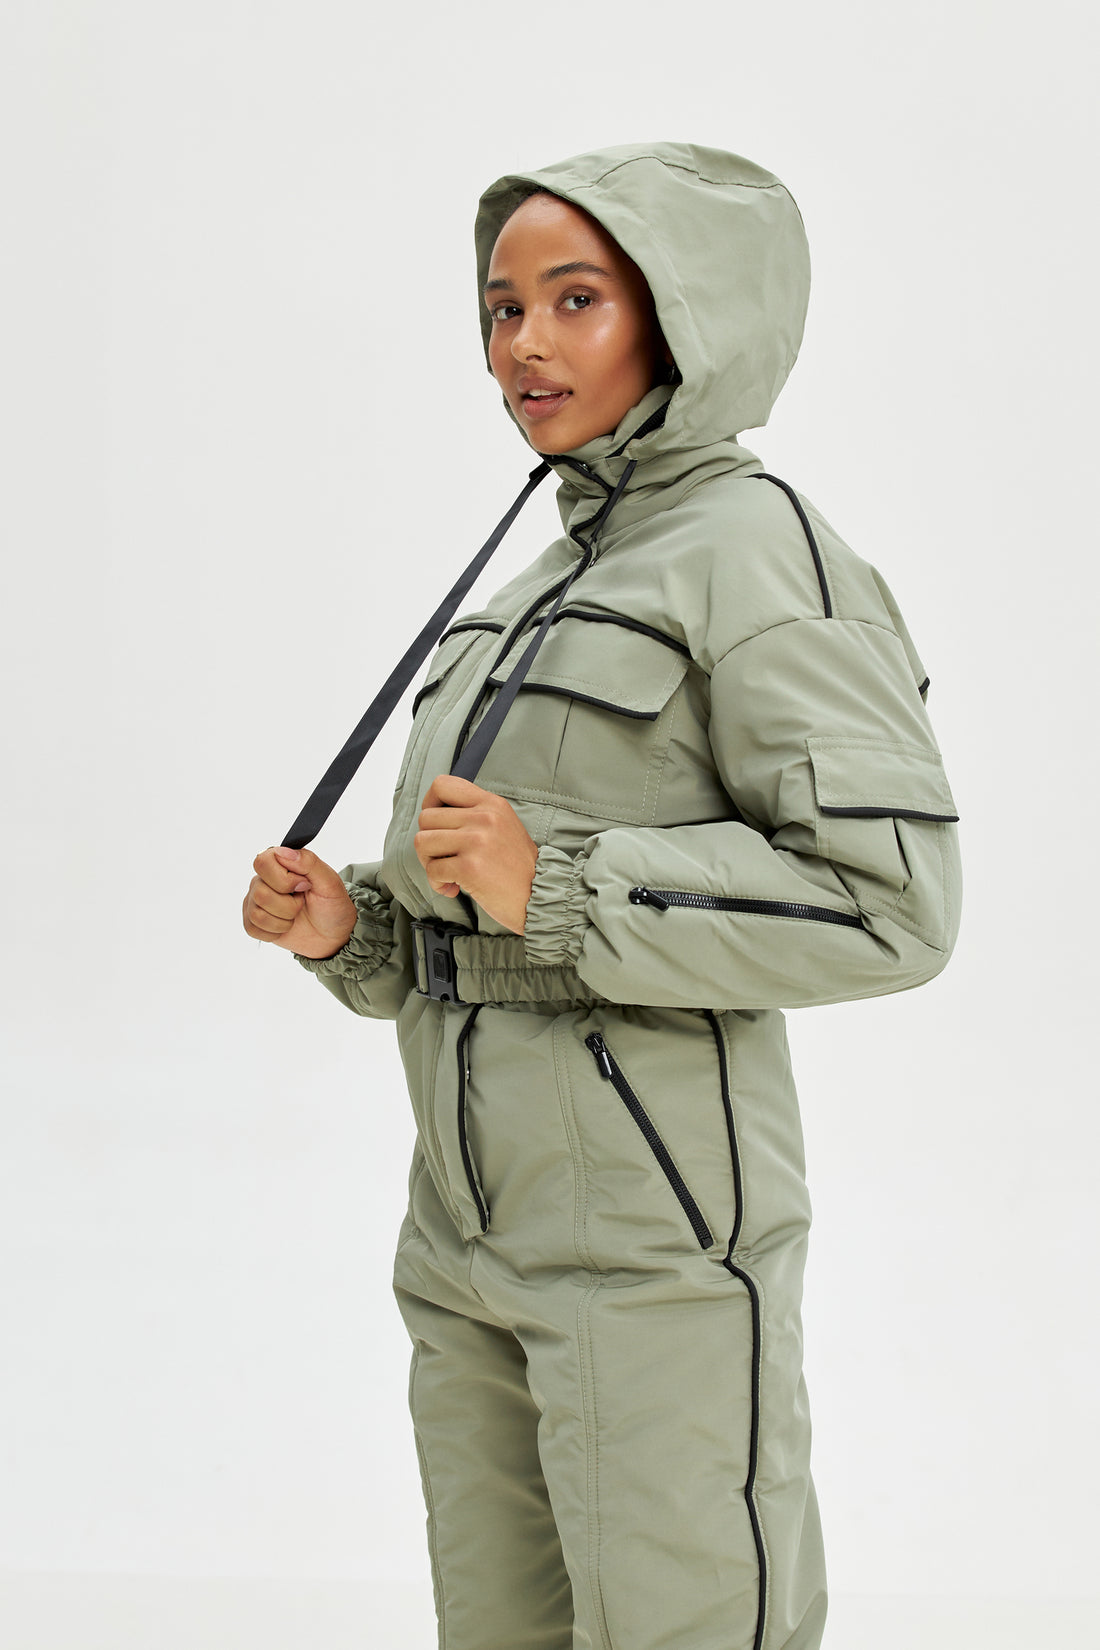 Olive ski suit BLANC - OLIVE with black edging - Full body snowsuit woman for winter sport activewear